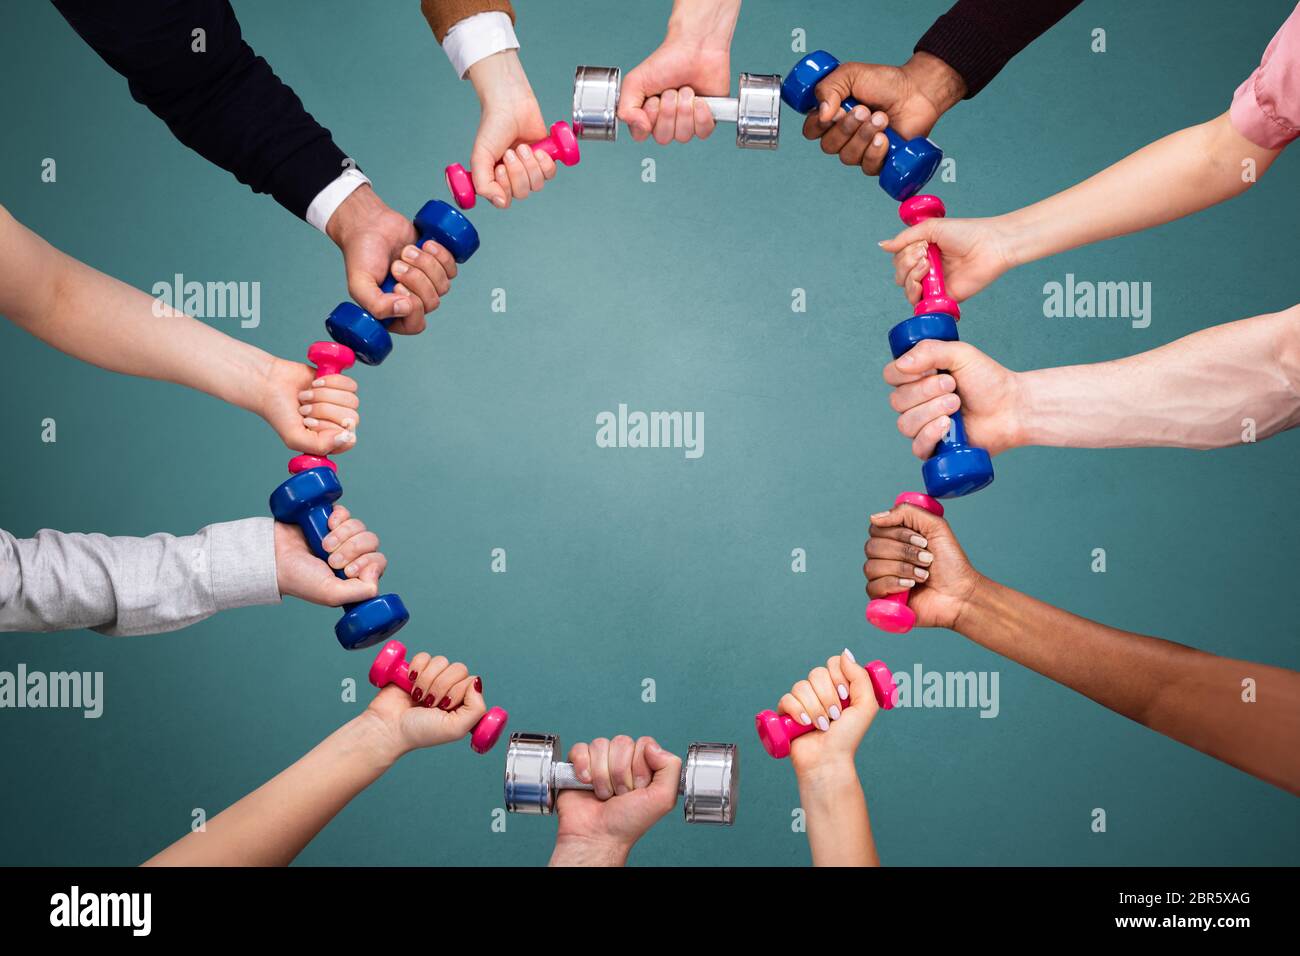 Group Of People's Hand Making Circular Shape With Colorful Dumbbells Above Green Background Stock Photo